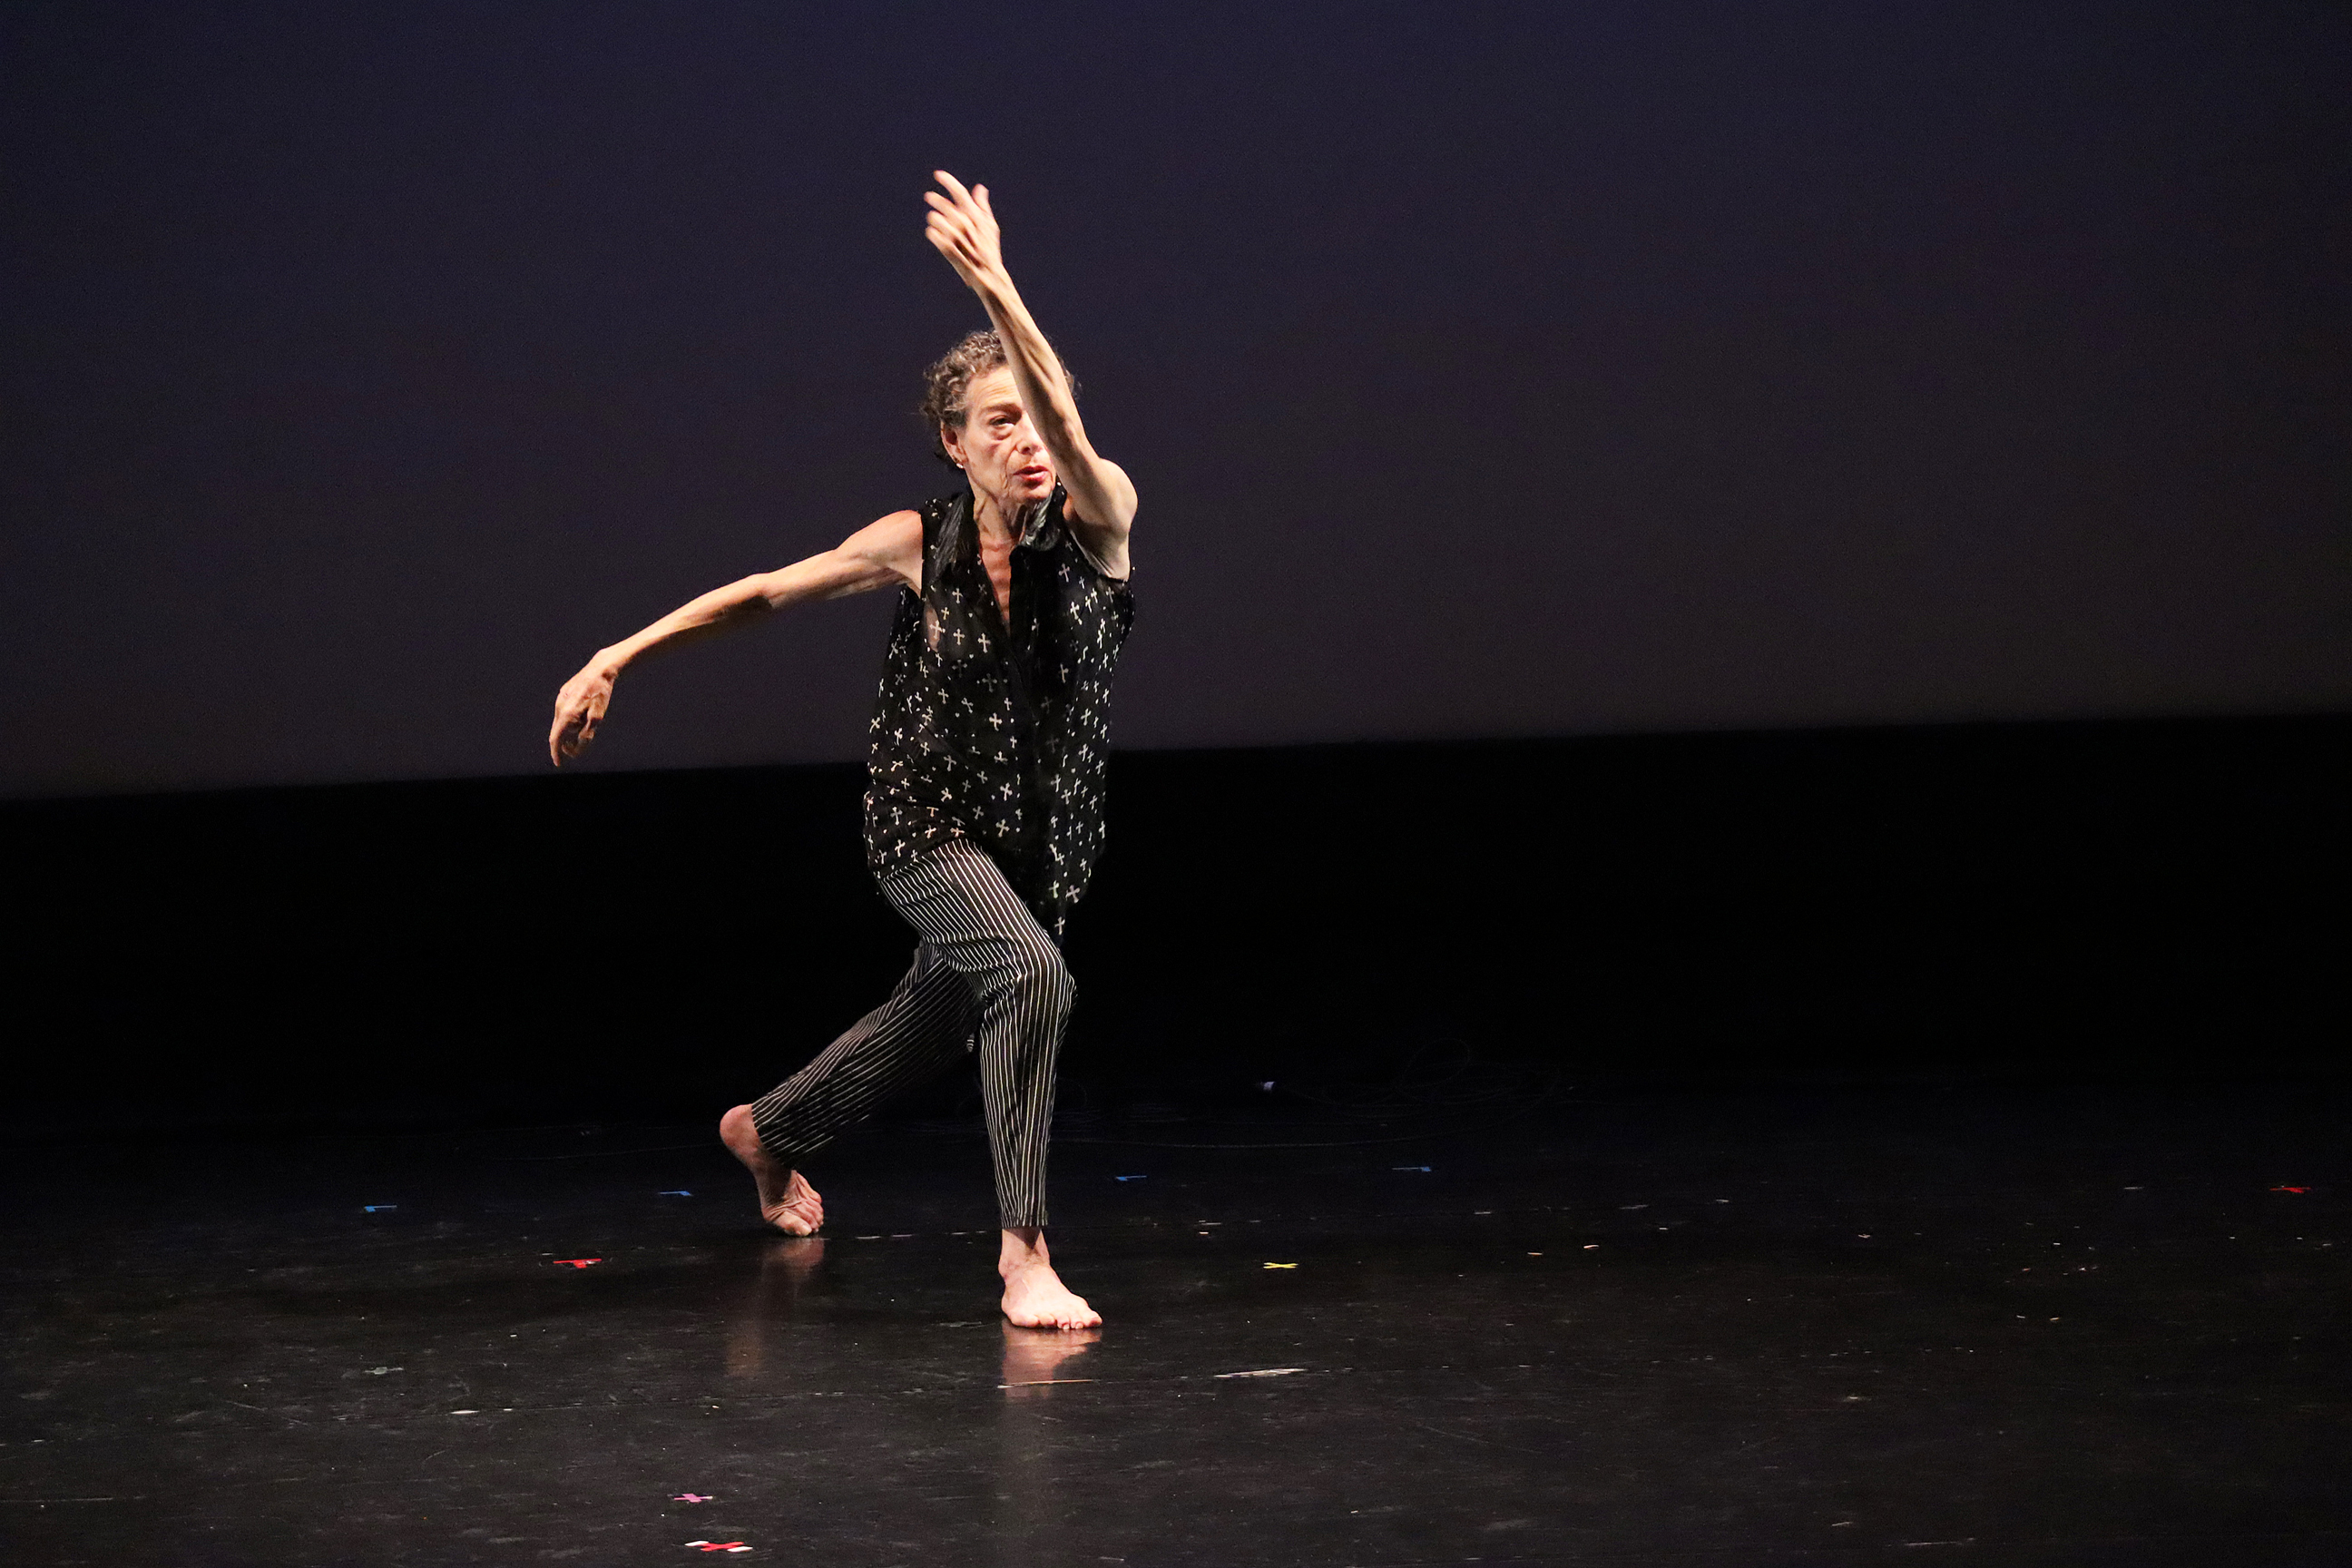 Photo of Barbara performing on stage. She is lunging forward, one arm is extending sideways and the other is extending upwards diagonally. Photo courtesy of the artist.